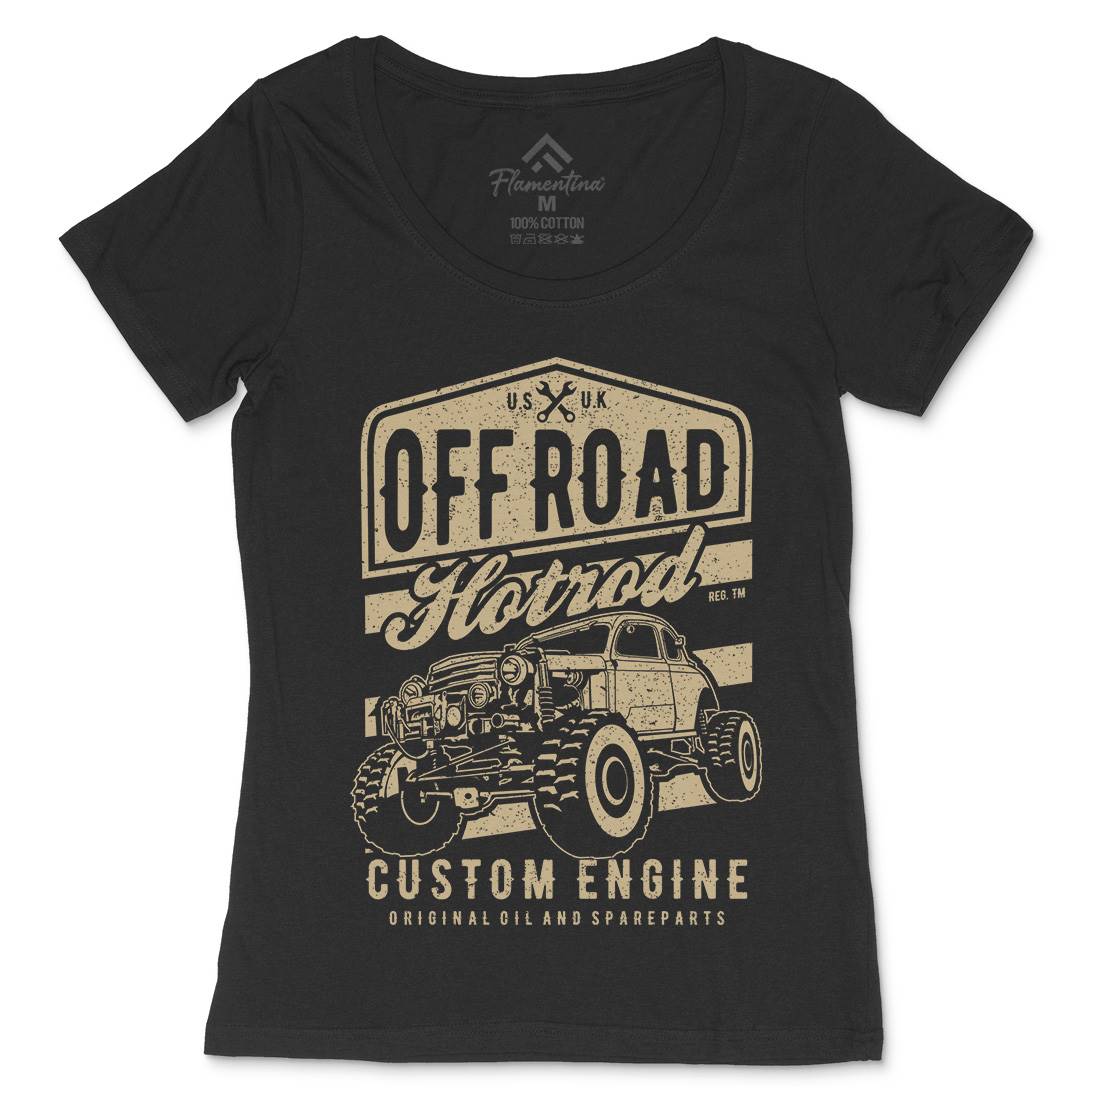 Offroad Hotrod Womens Scoop Neck T-Shirt Cars A730